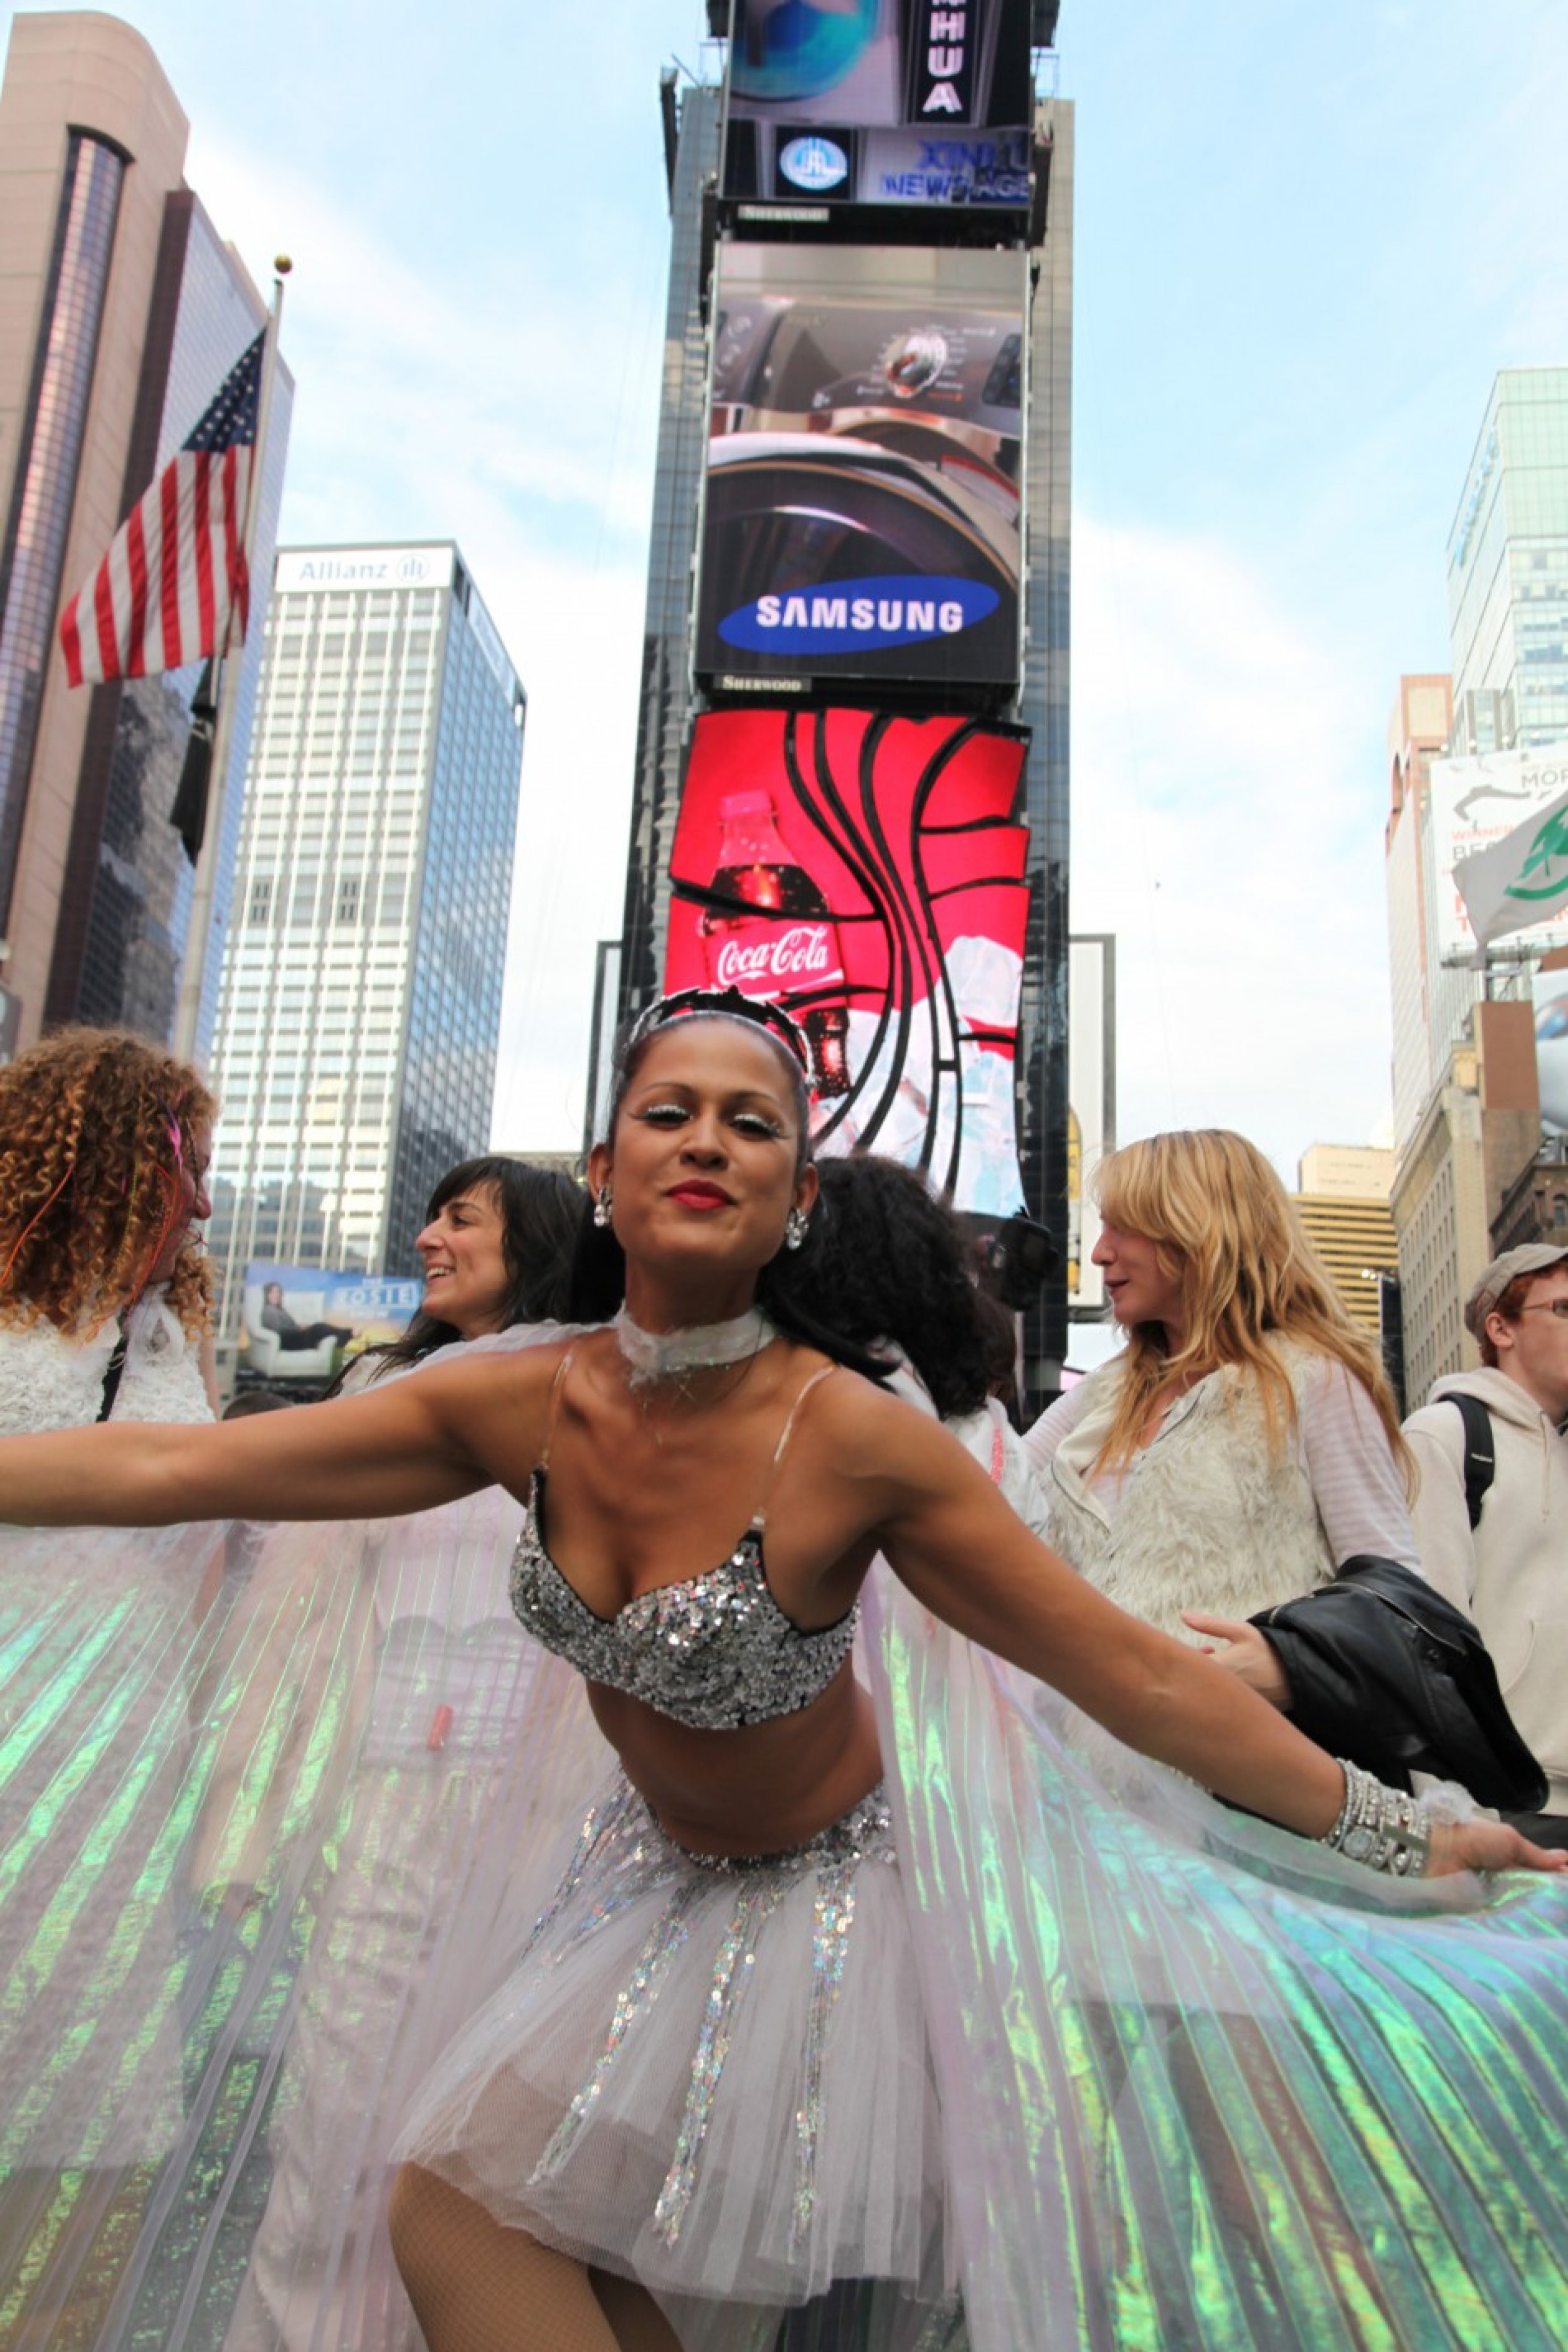 Performer in Times Square Protest